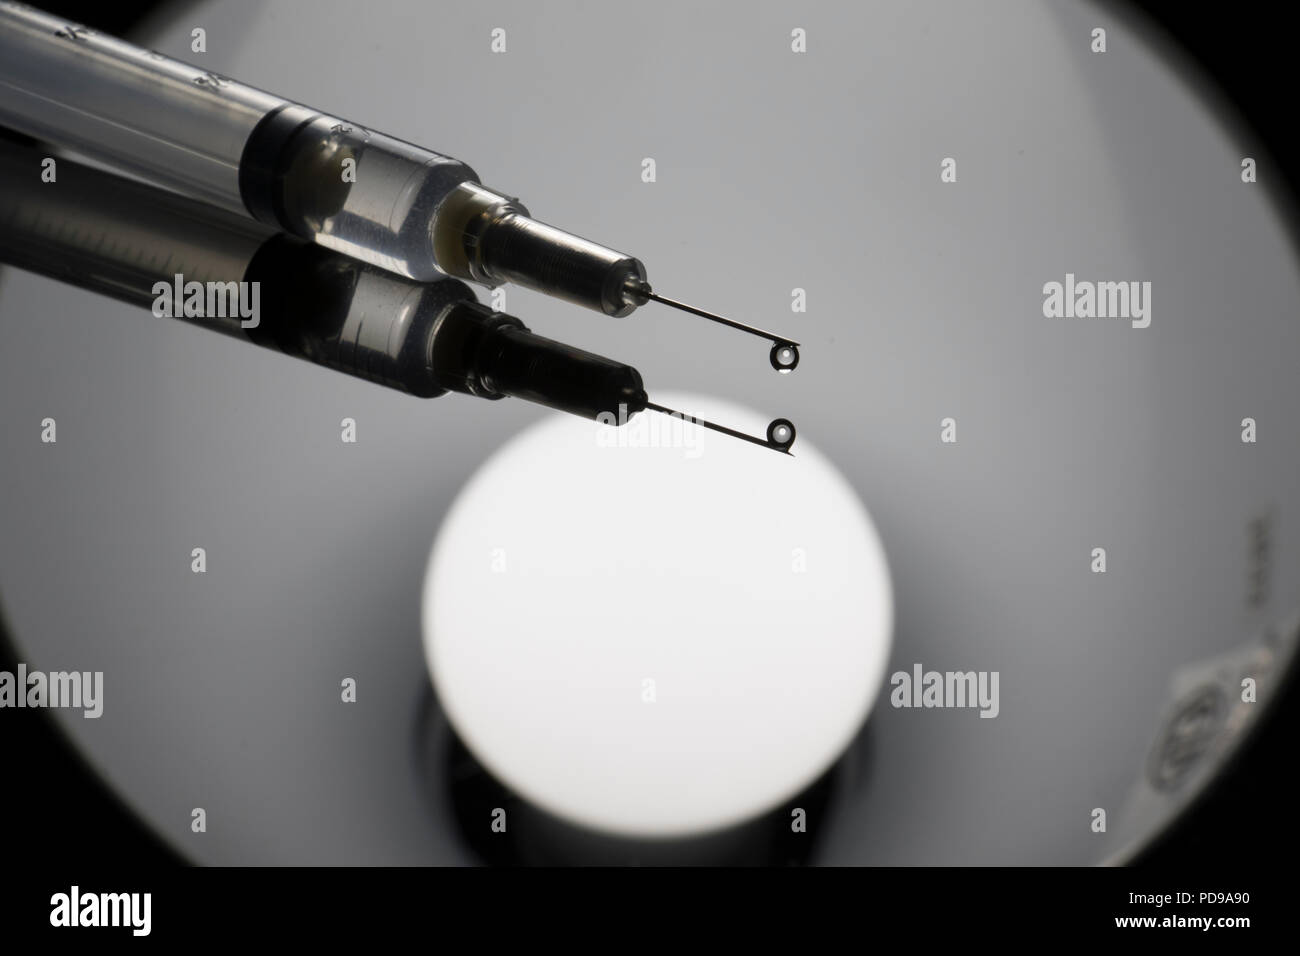 Close up of syringe with flu vaccine. Drop of liquid coming out of a needle reflecting on a shiny table. Stock Photo